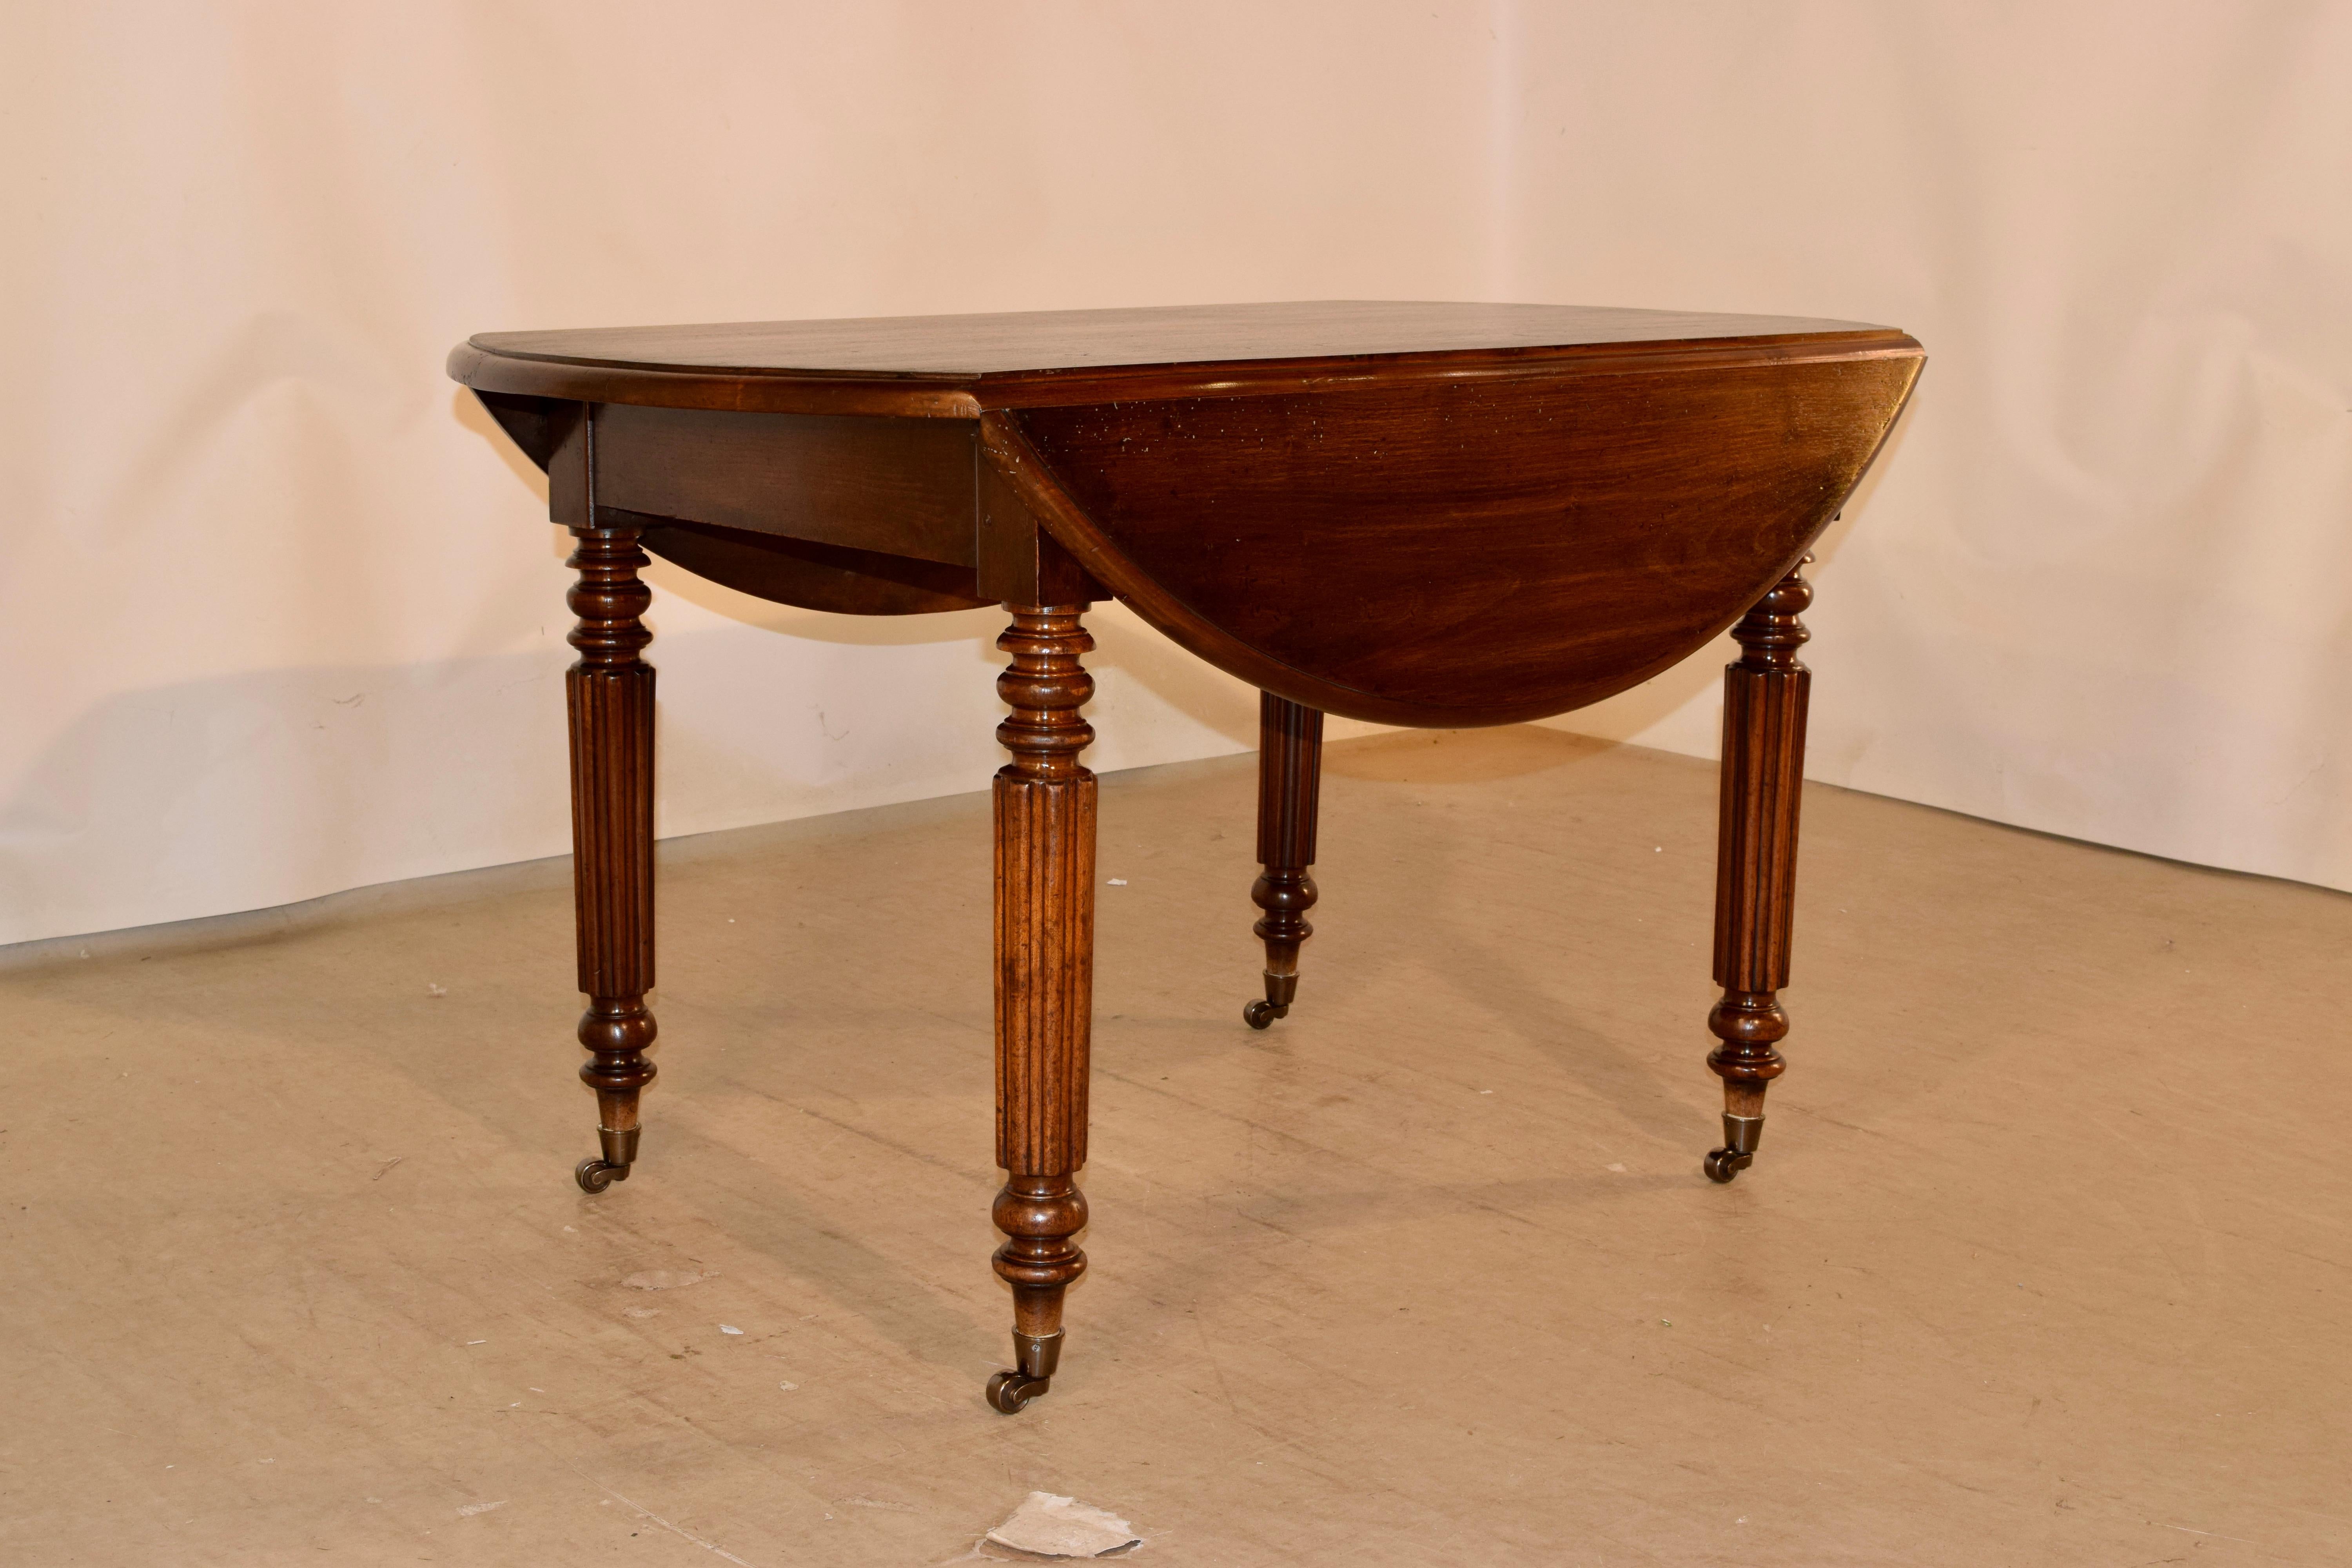 19th century Louis Philippe drop-leaf table in walnut, from France. The top has wonderful graining and beveled edges. The top opens to measure 47.25 x 46.5. The top is over a simple apron and raised on hand-turned and reeded legs on brass casters.